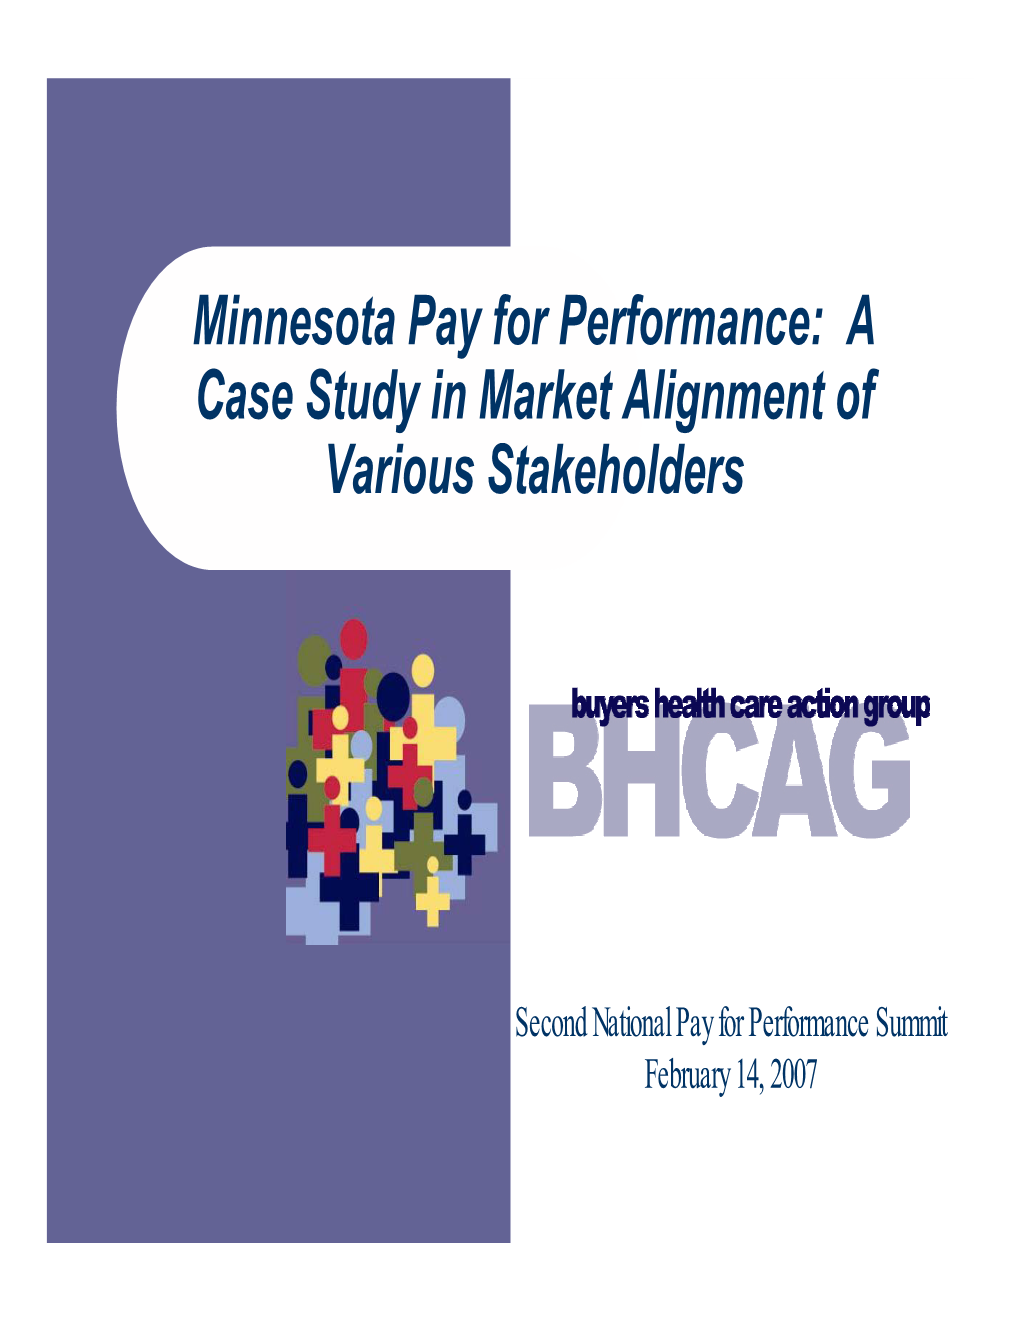 Minnesota Pay for Performance: a Case Study in Market Alignment of Various Stakeholders